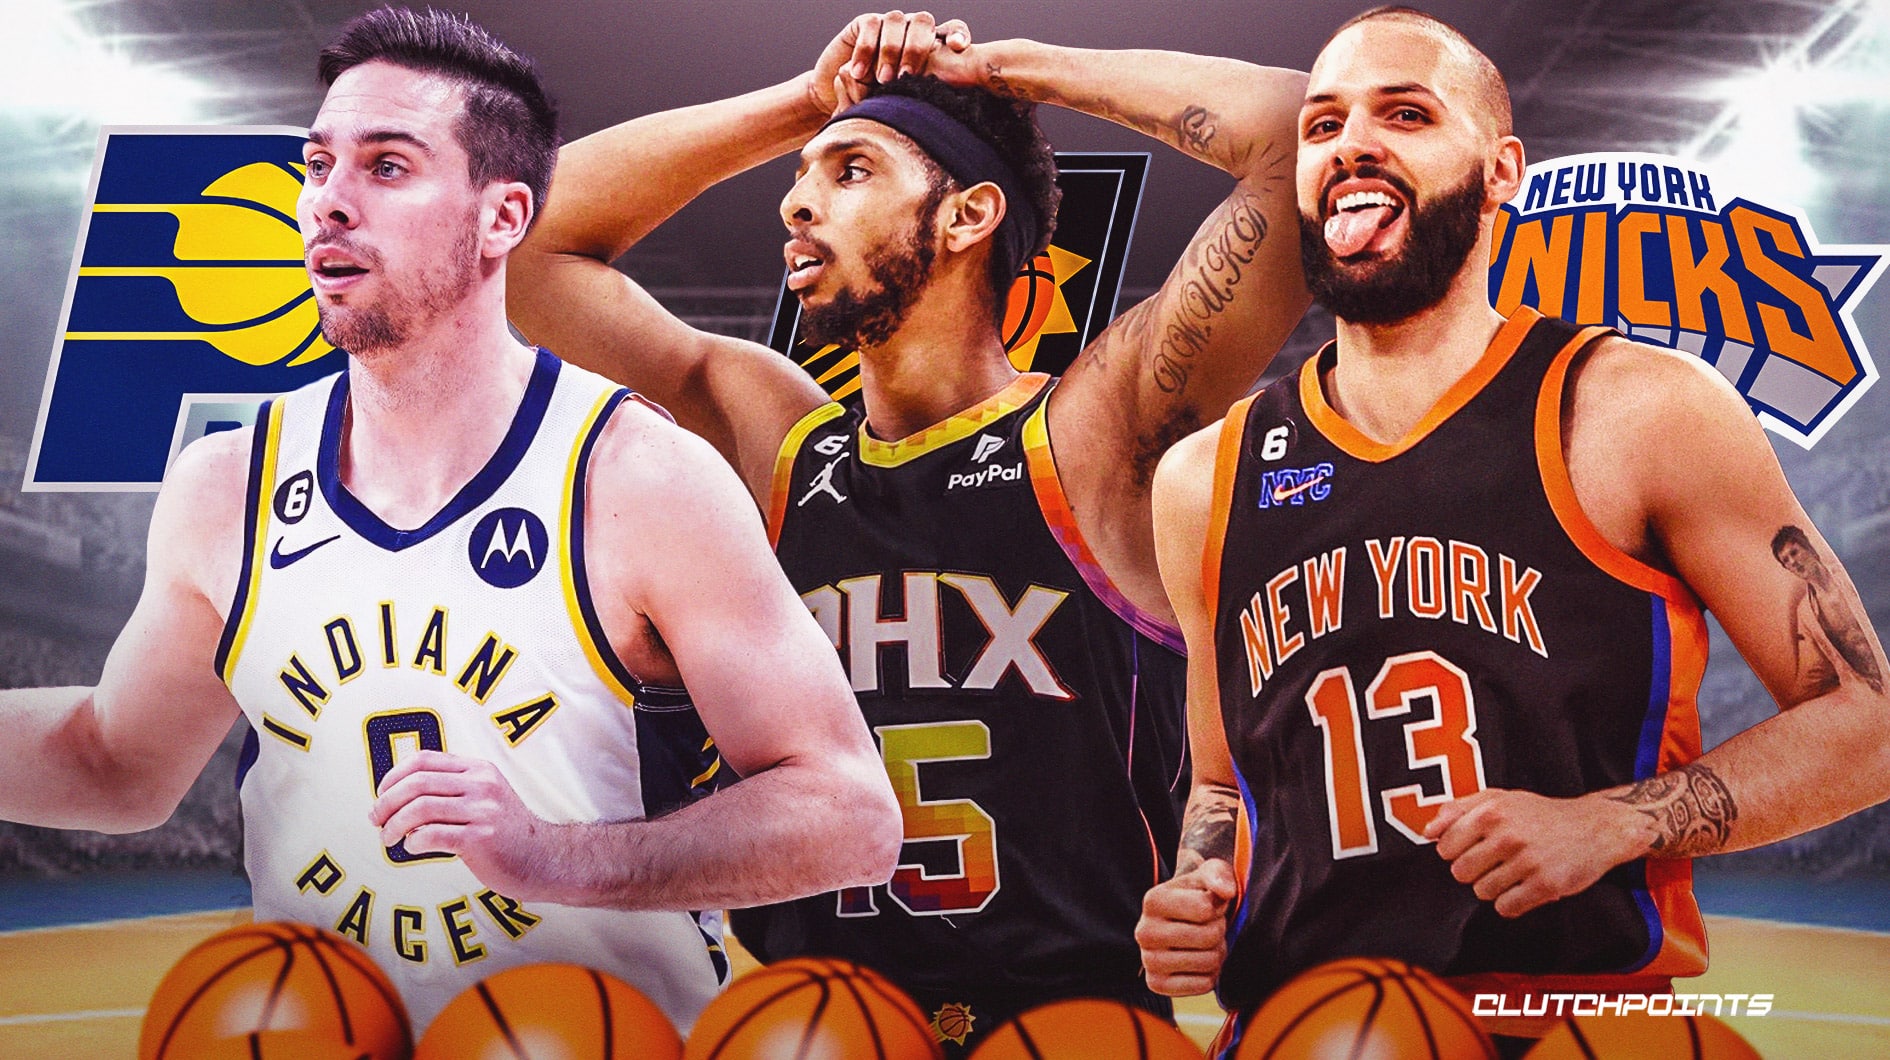 NY Knicks: What was the team's record in each 2021 jersey?